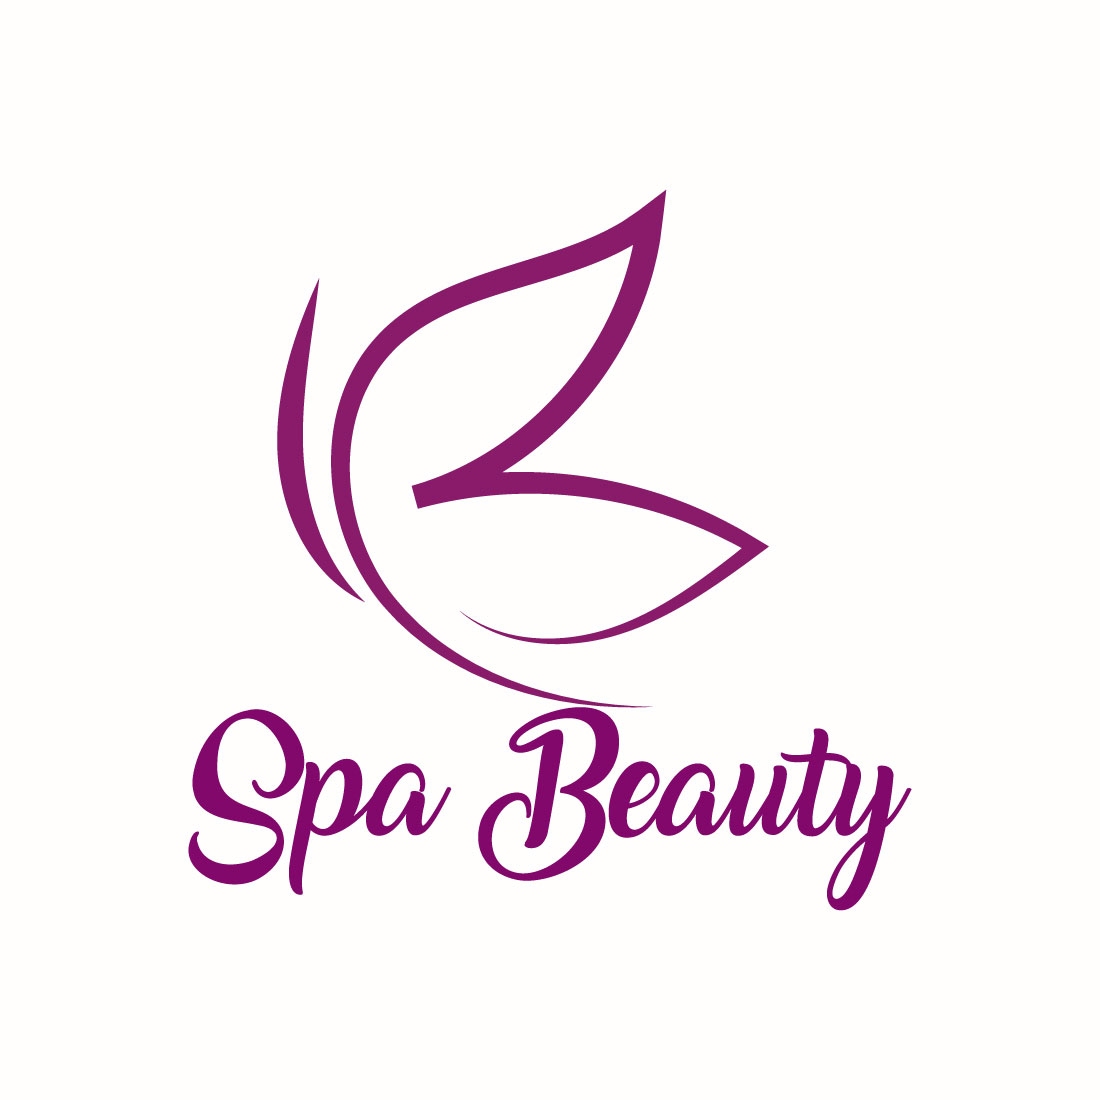 Free skin's beauty potential logo cover image.